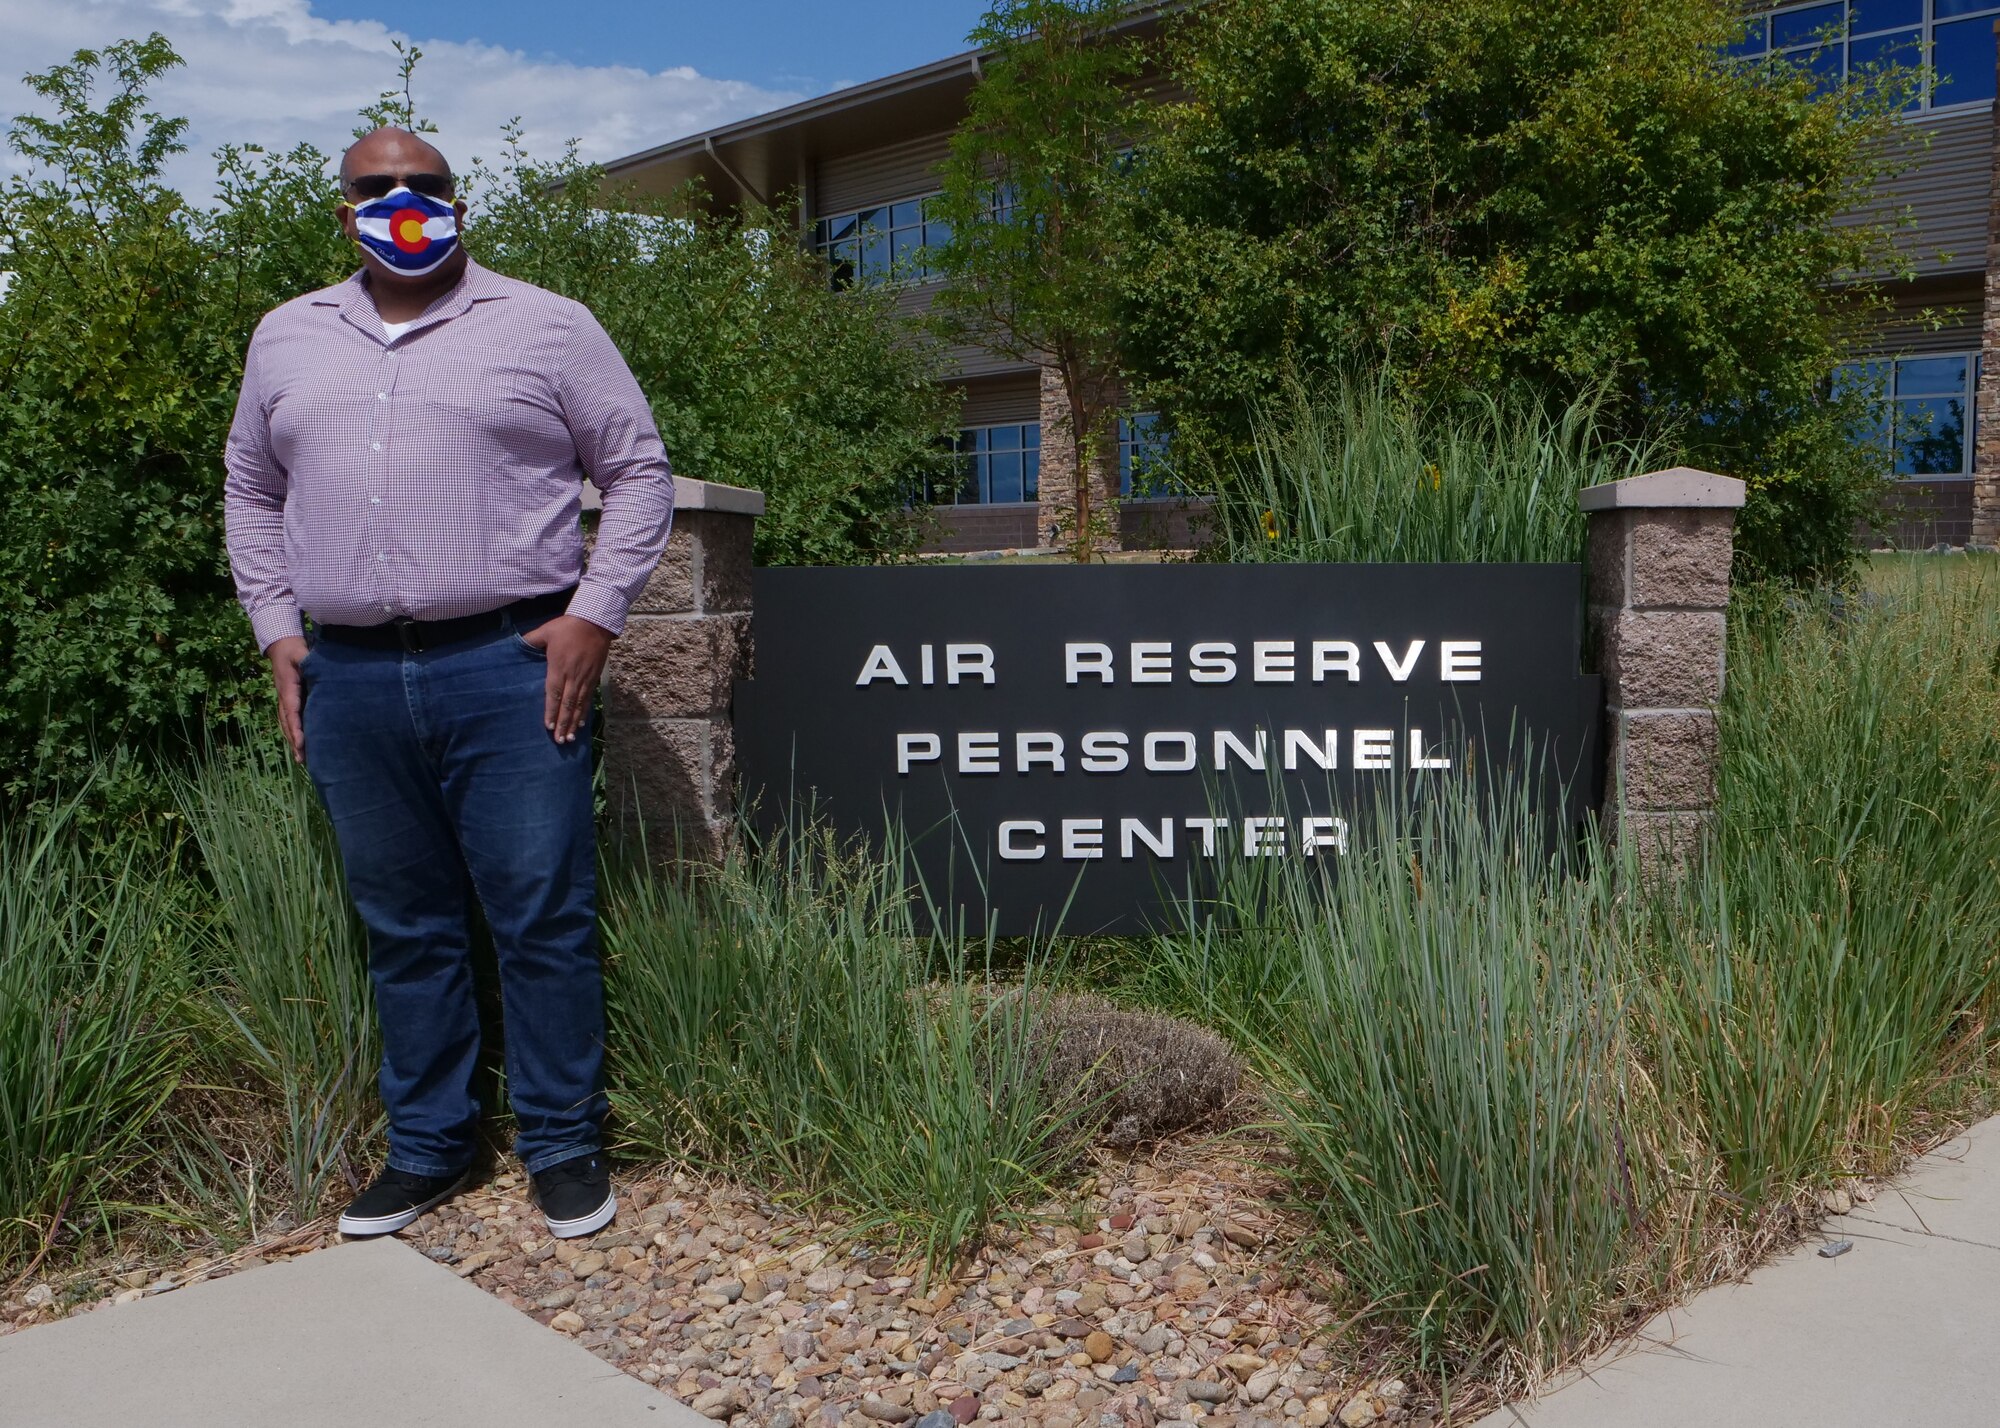 Justin Lozada, a financial management specialist at Headquarters Air Reserve Personnel Center, poses for a photo outside of the building on July 23, 2020, at Buckley Air Force Base, Colorado. Lozada recently began his position and also contracted COVID-19 just before beginning his new job. (U.S. Air Force photo by Master Sgt. Leisa Grant/Released)